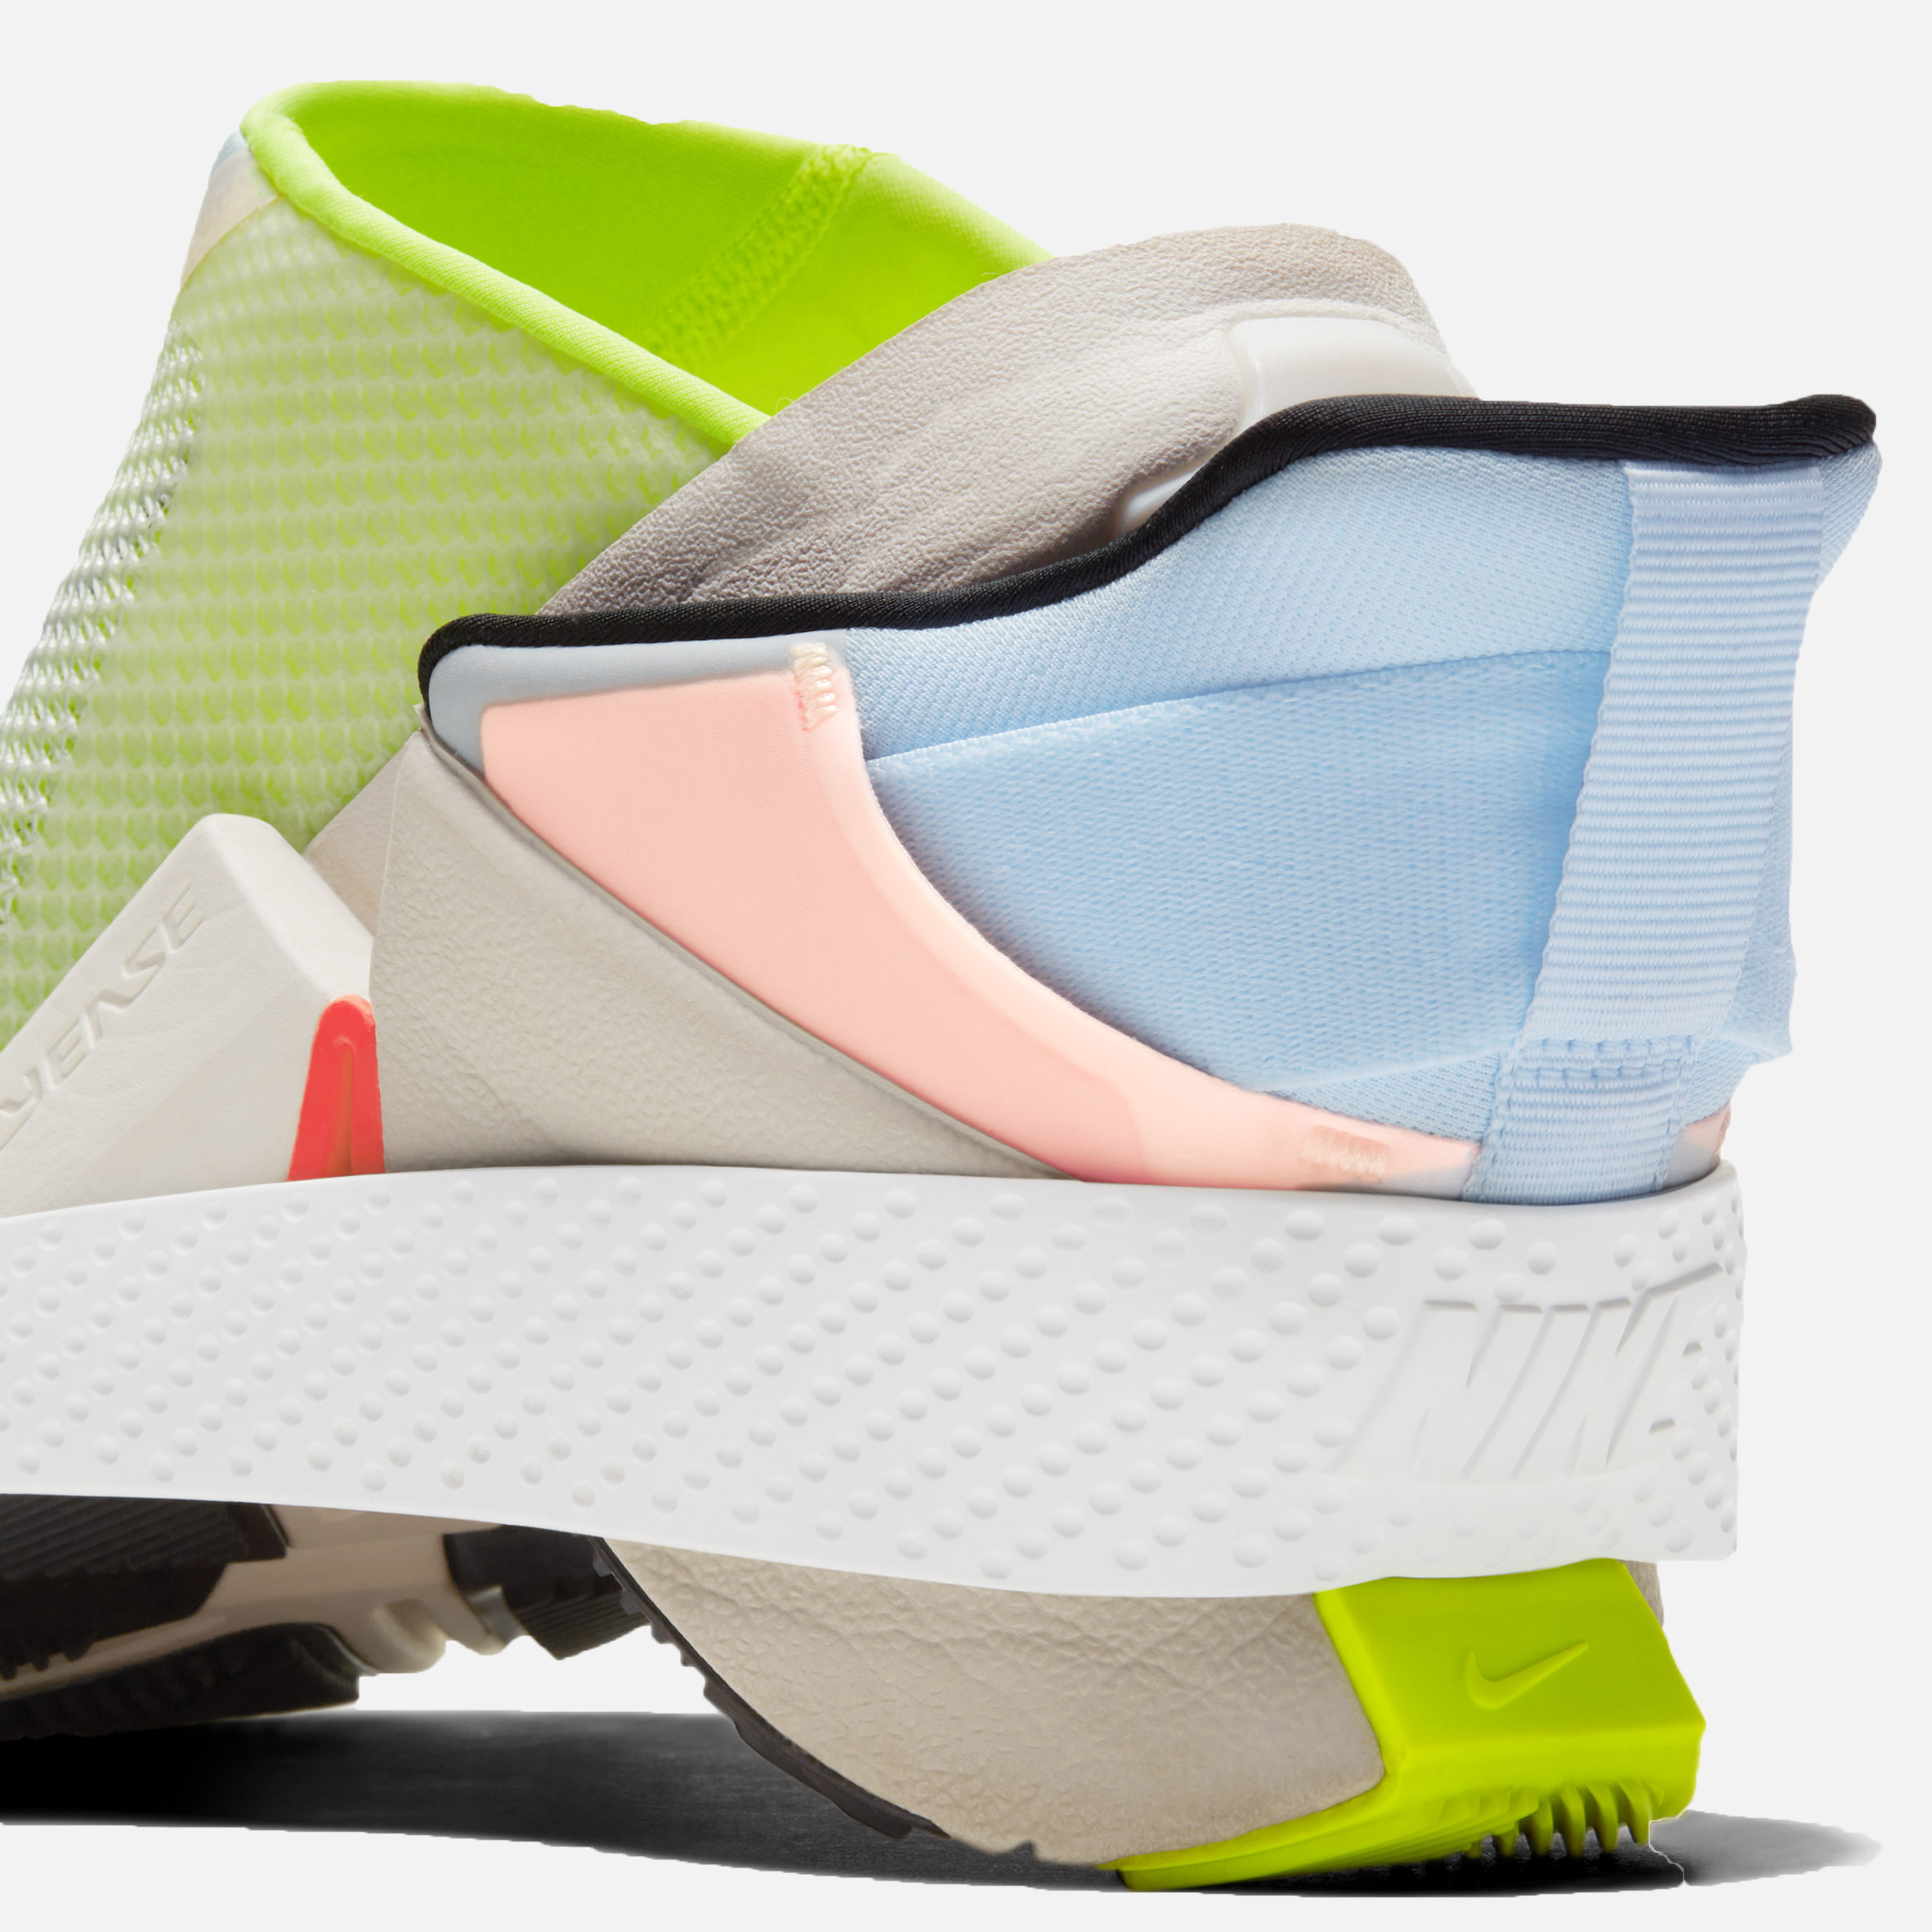 Bi-stable hinge within the Nike GO FlyEase